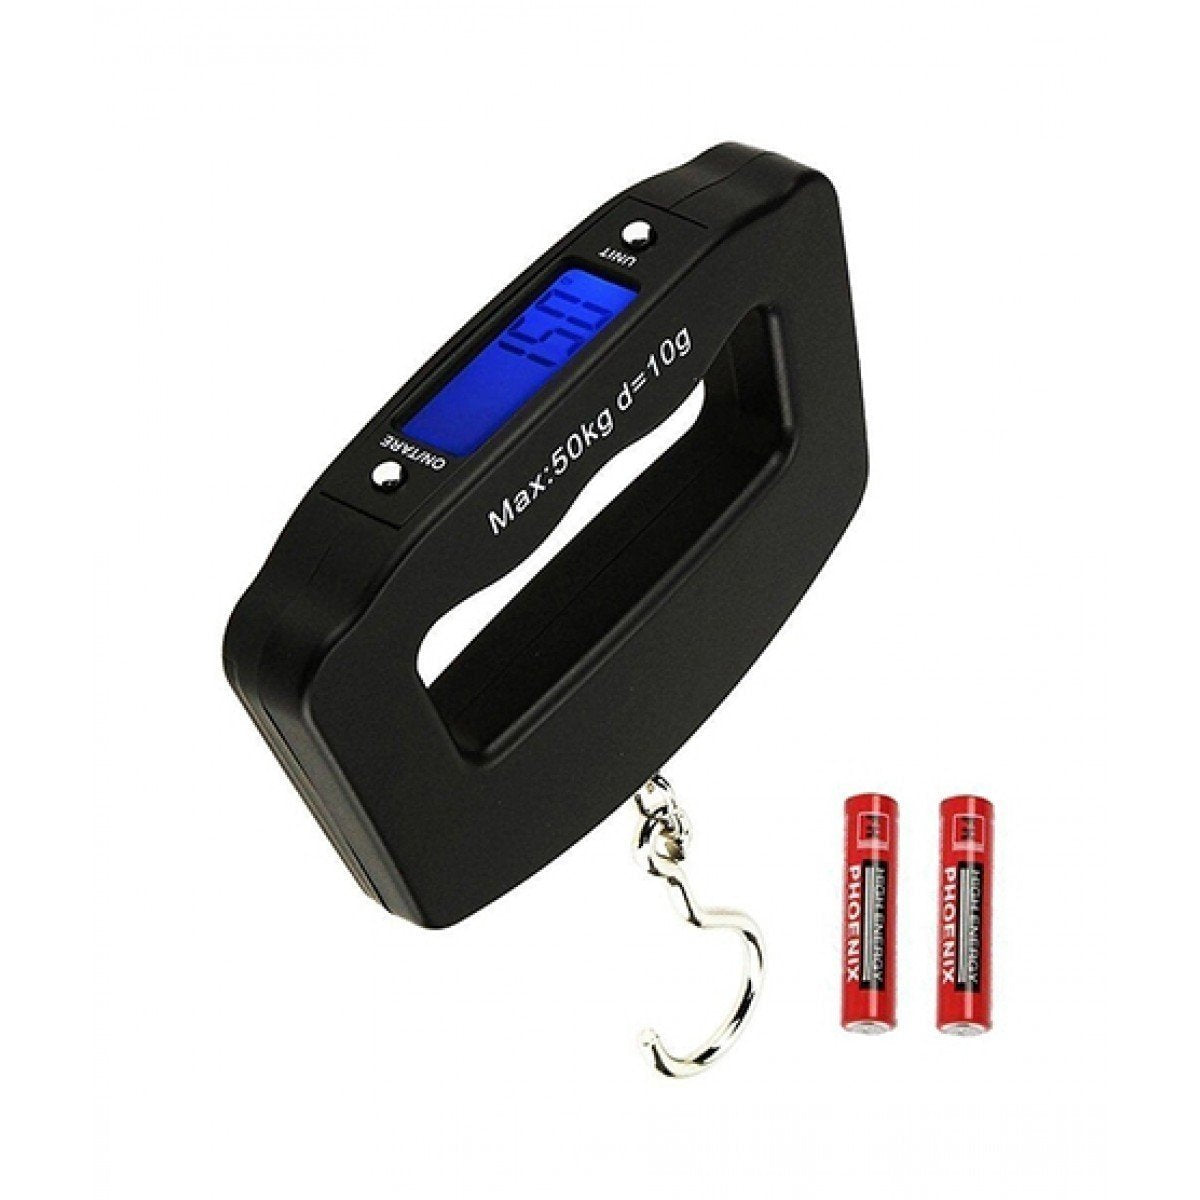 50 kg black digital electronics portable luggage scale with lcd backlight